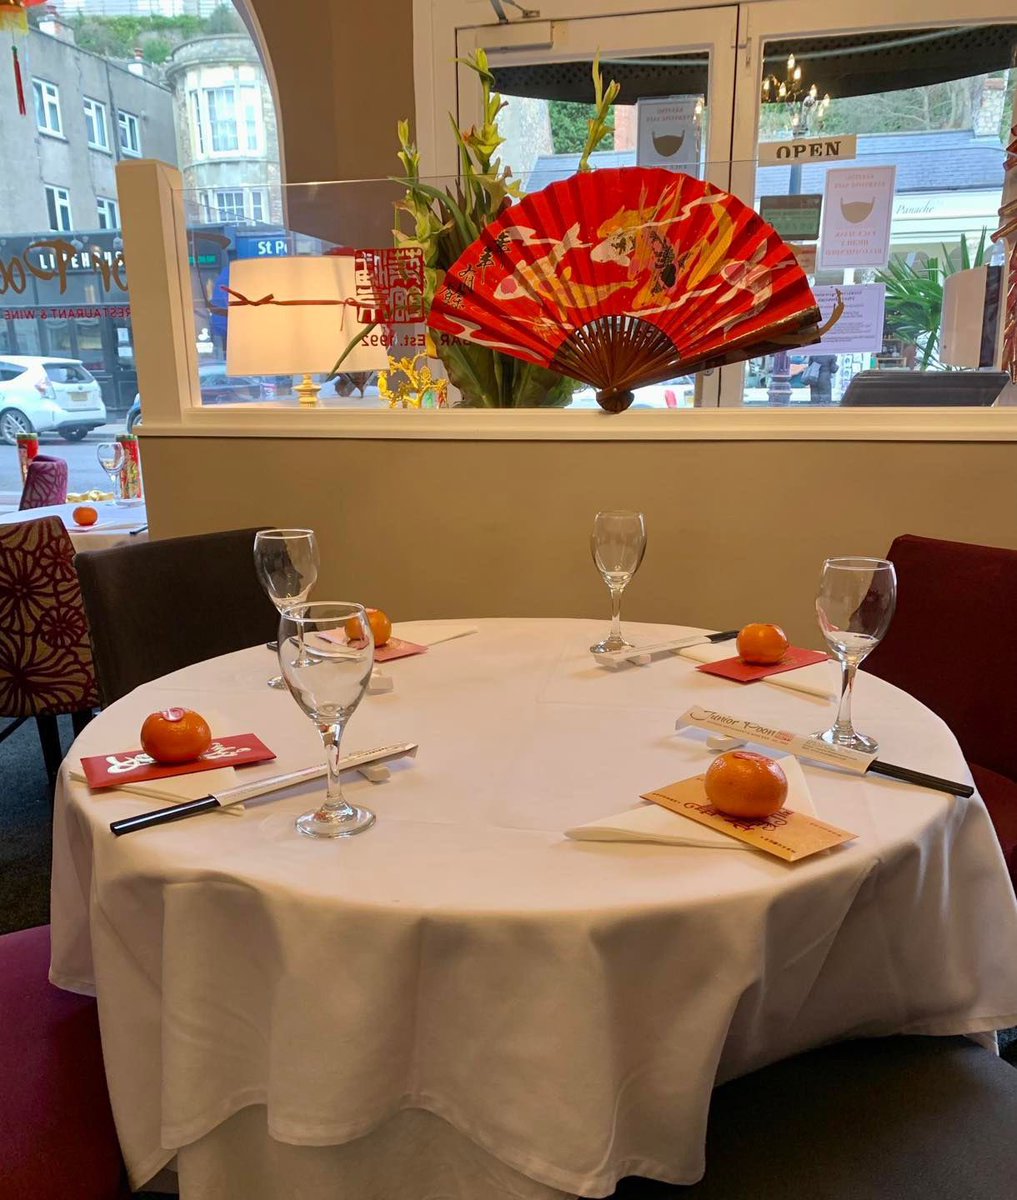 🐲Our #restaurant is now FullyBooked for #ChineseNewYear of the Dragon Celebrations,Sat 10th Febr!🧧 Thank you for your reservations,we are looking forward to seeing all of you for the celebrations!🐉 Our #winebar will be open for some tapas in the evening #clevedon #lunarnewyear